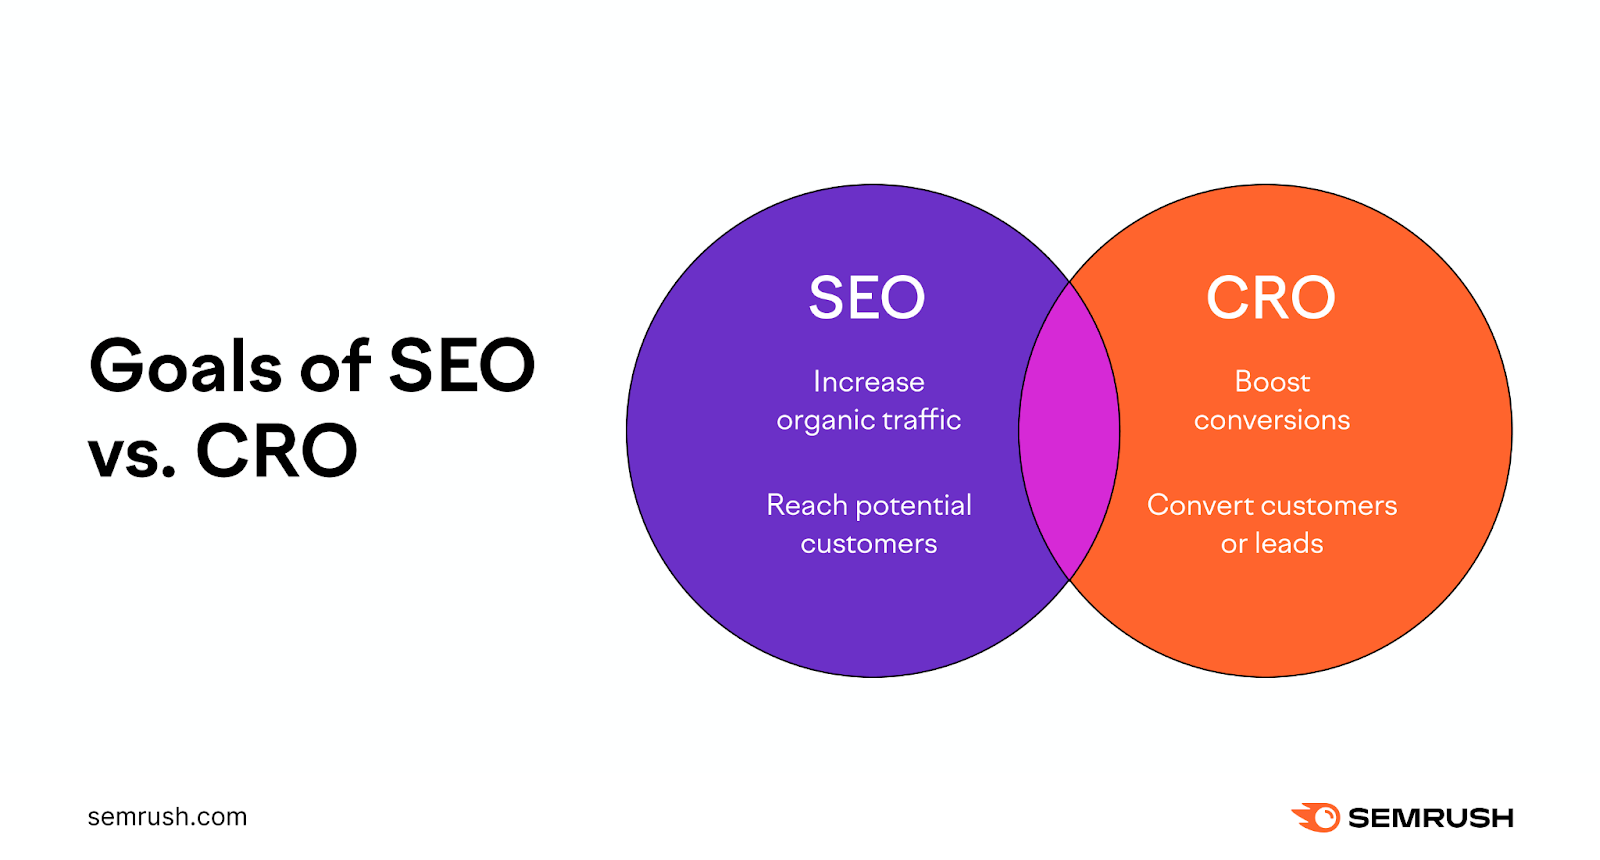 The goal of SEO is to increate organic traffic and reach potential customers. The goal of CRO is to boost conversions and convert customers or leads.